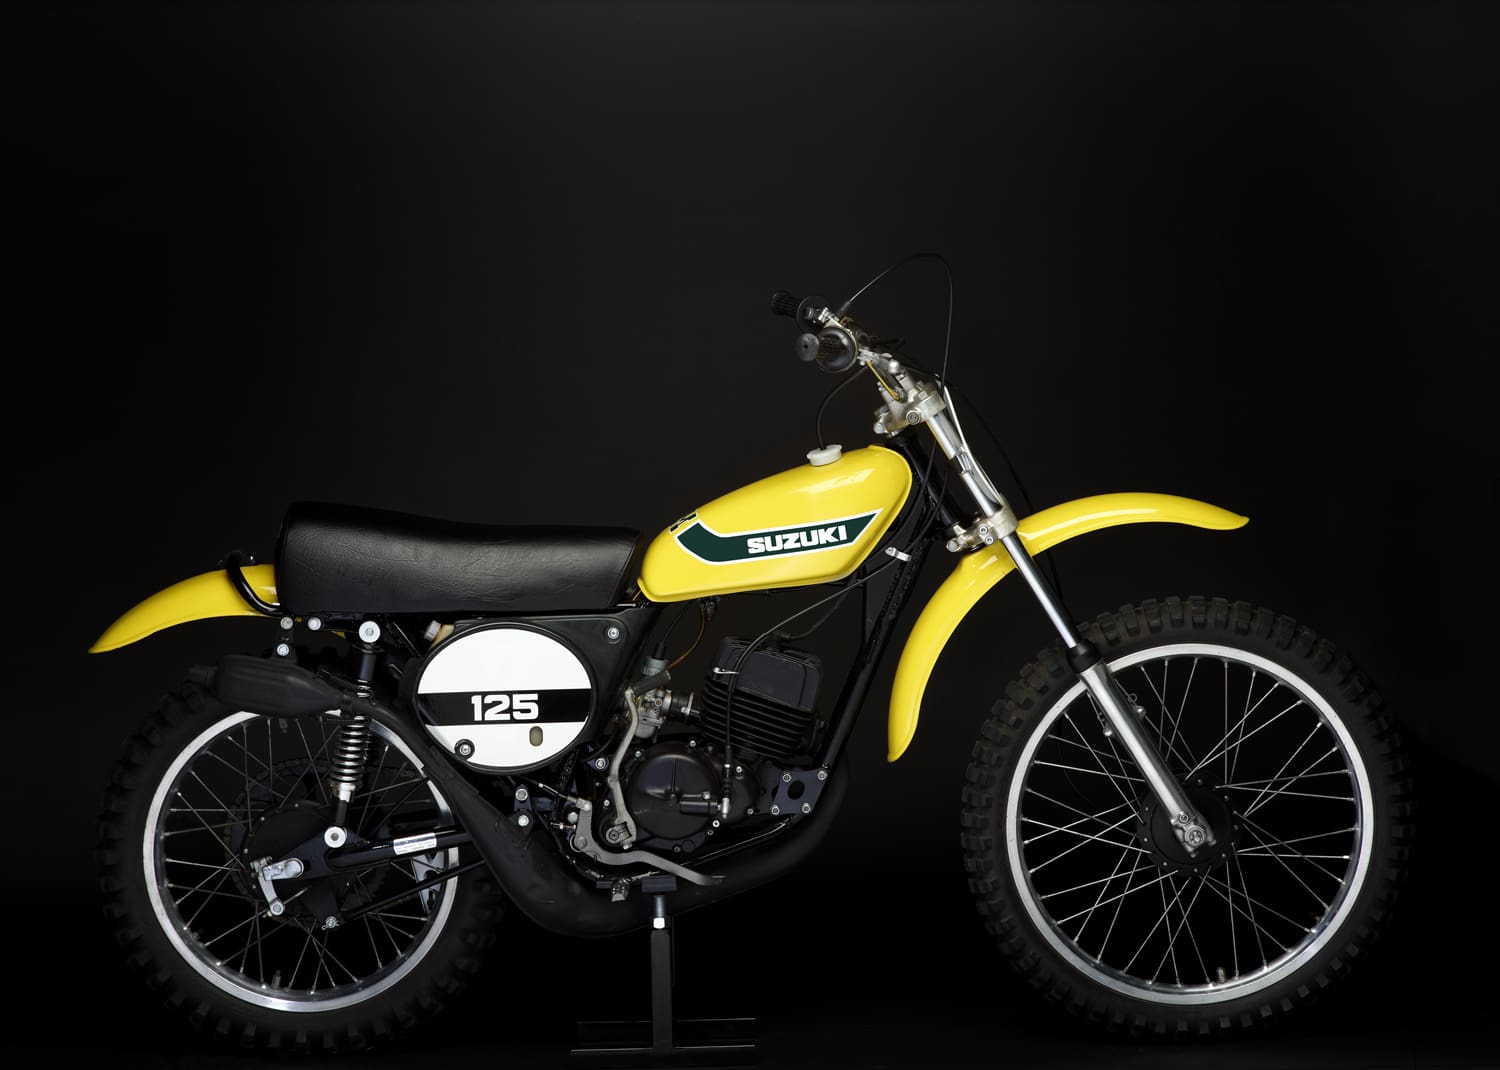 A yellow dirt bike, perfect for MX Motorbikes enthusiasts, sits confidently on a sleek black background.